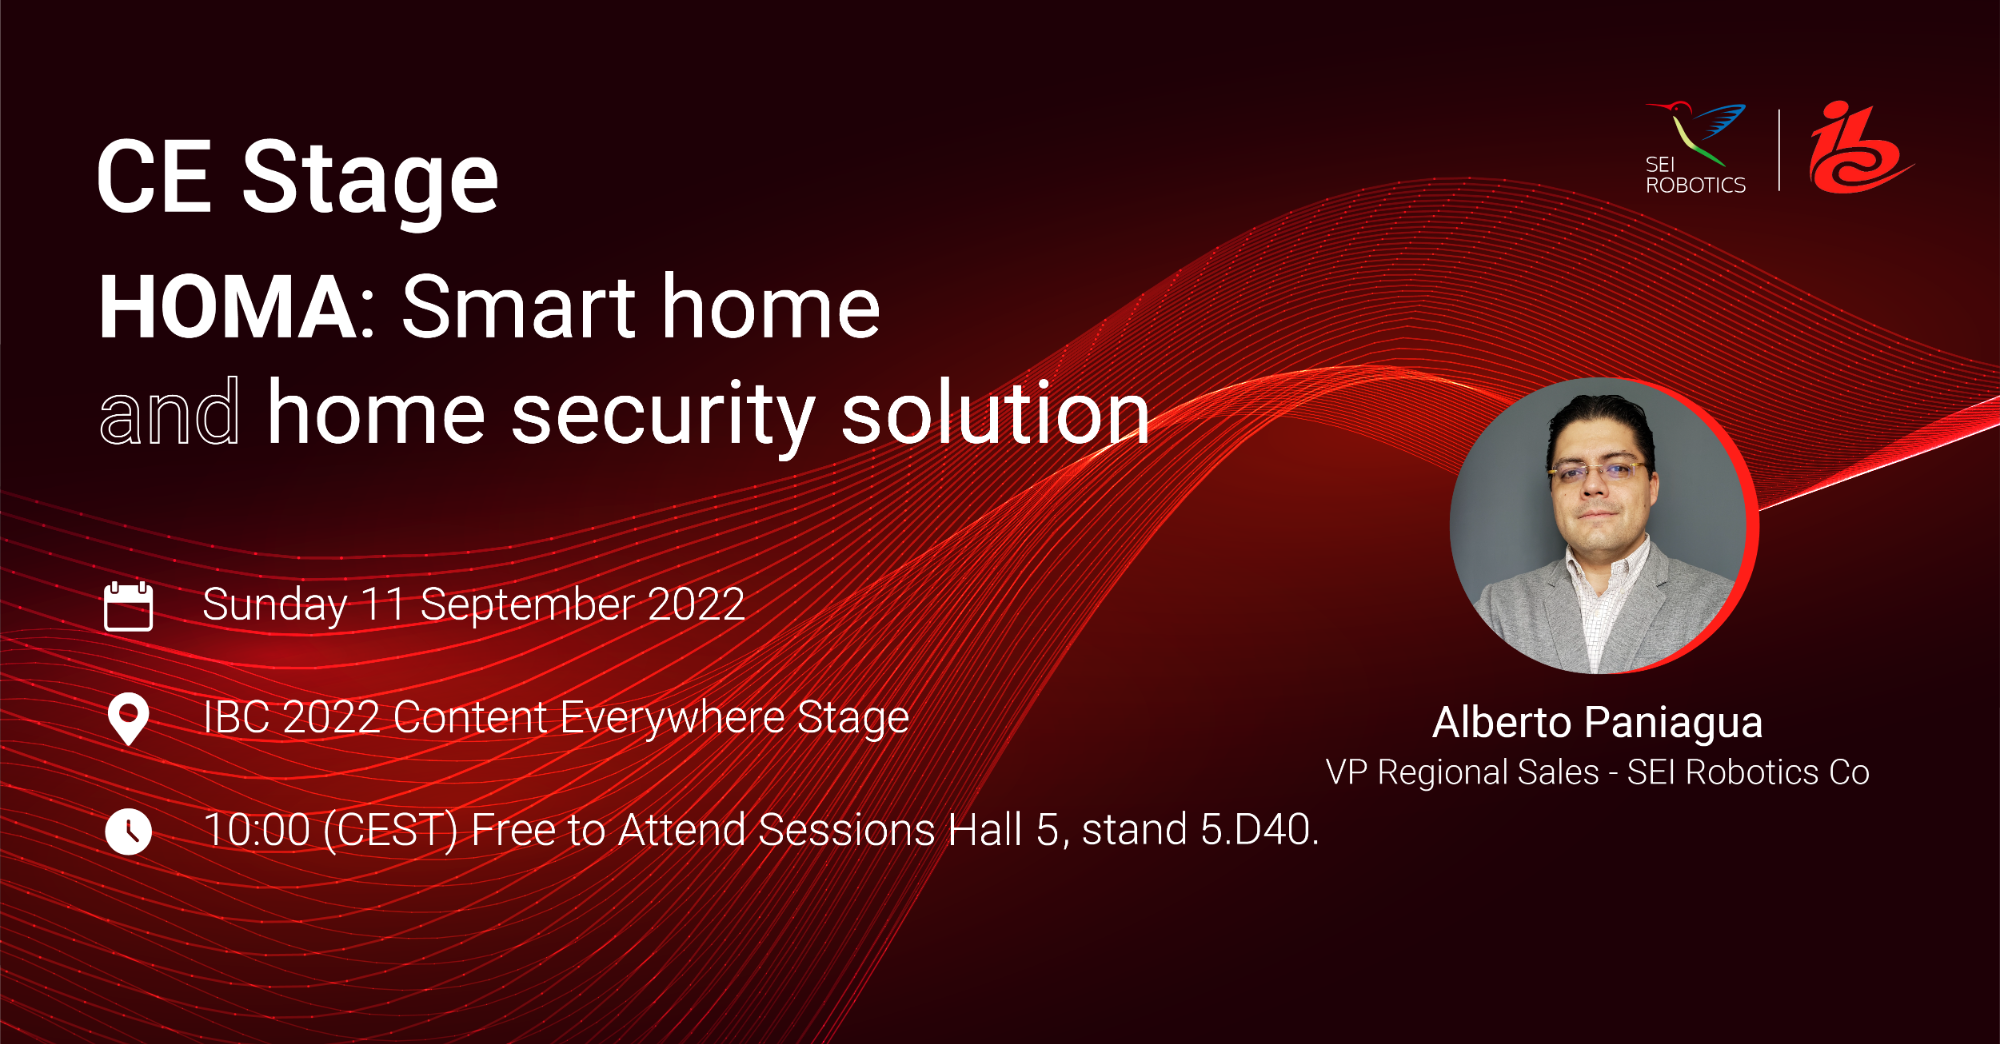 SEI Presents IoT Solutions on IBC 2022 CE Stage